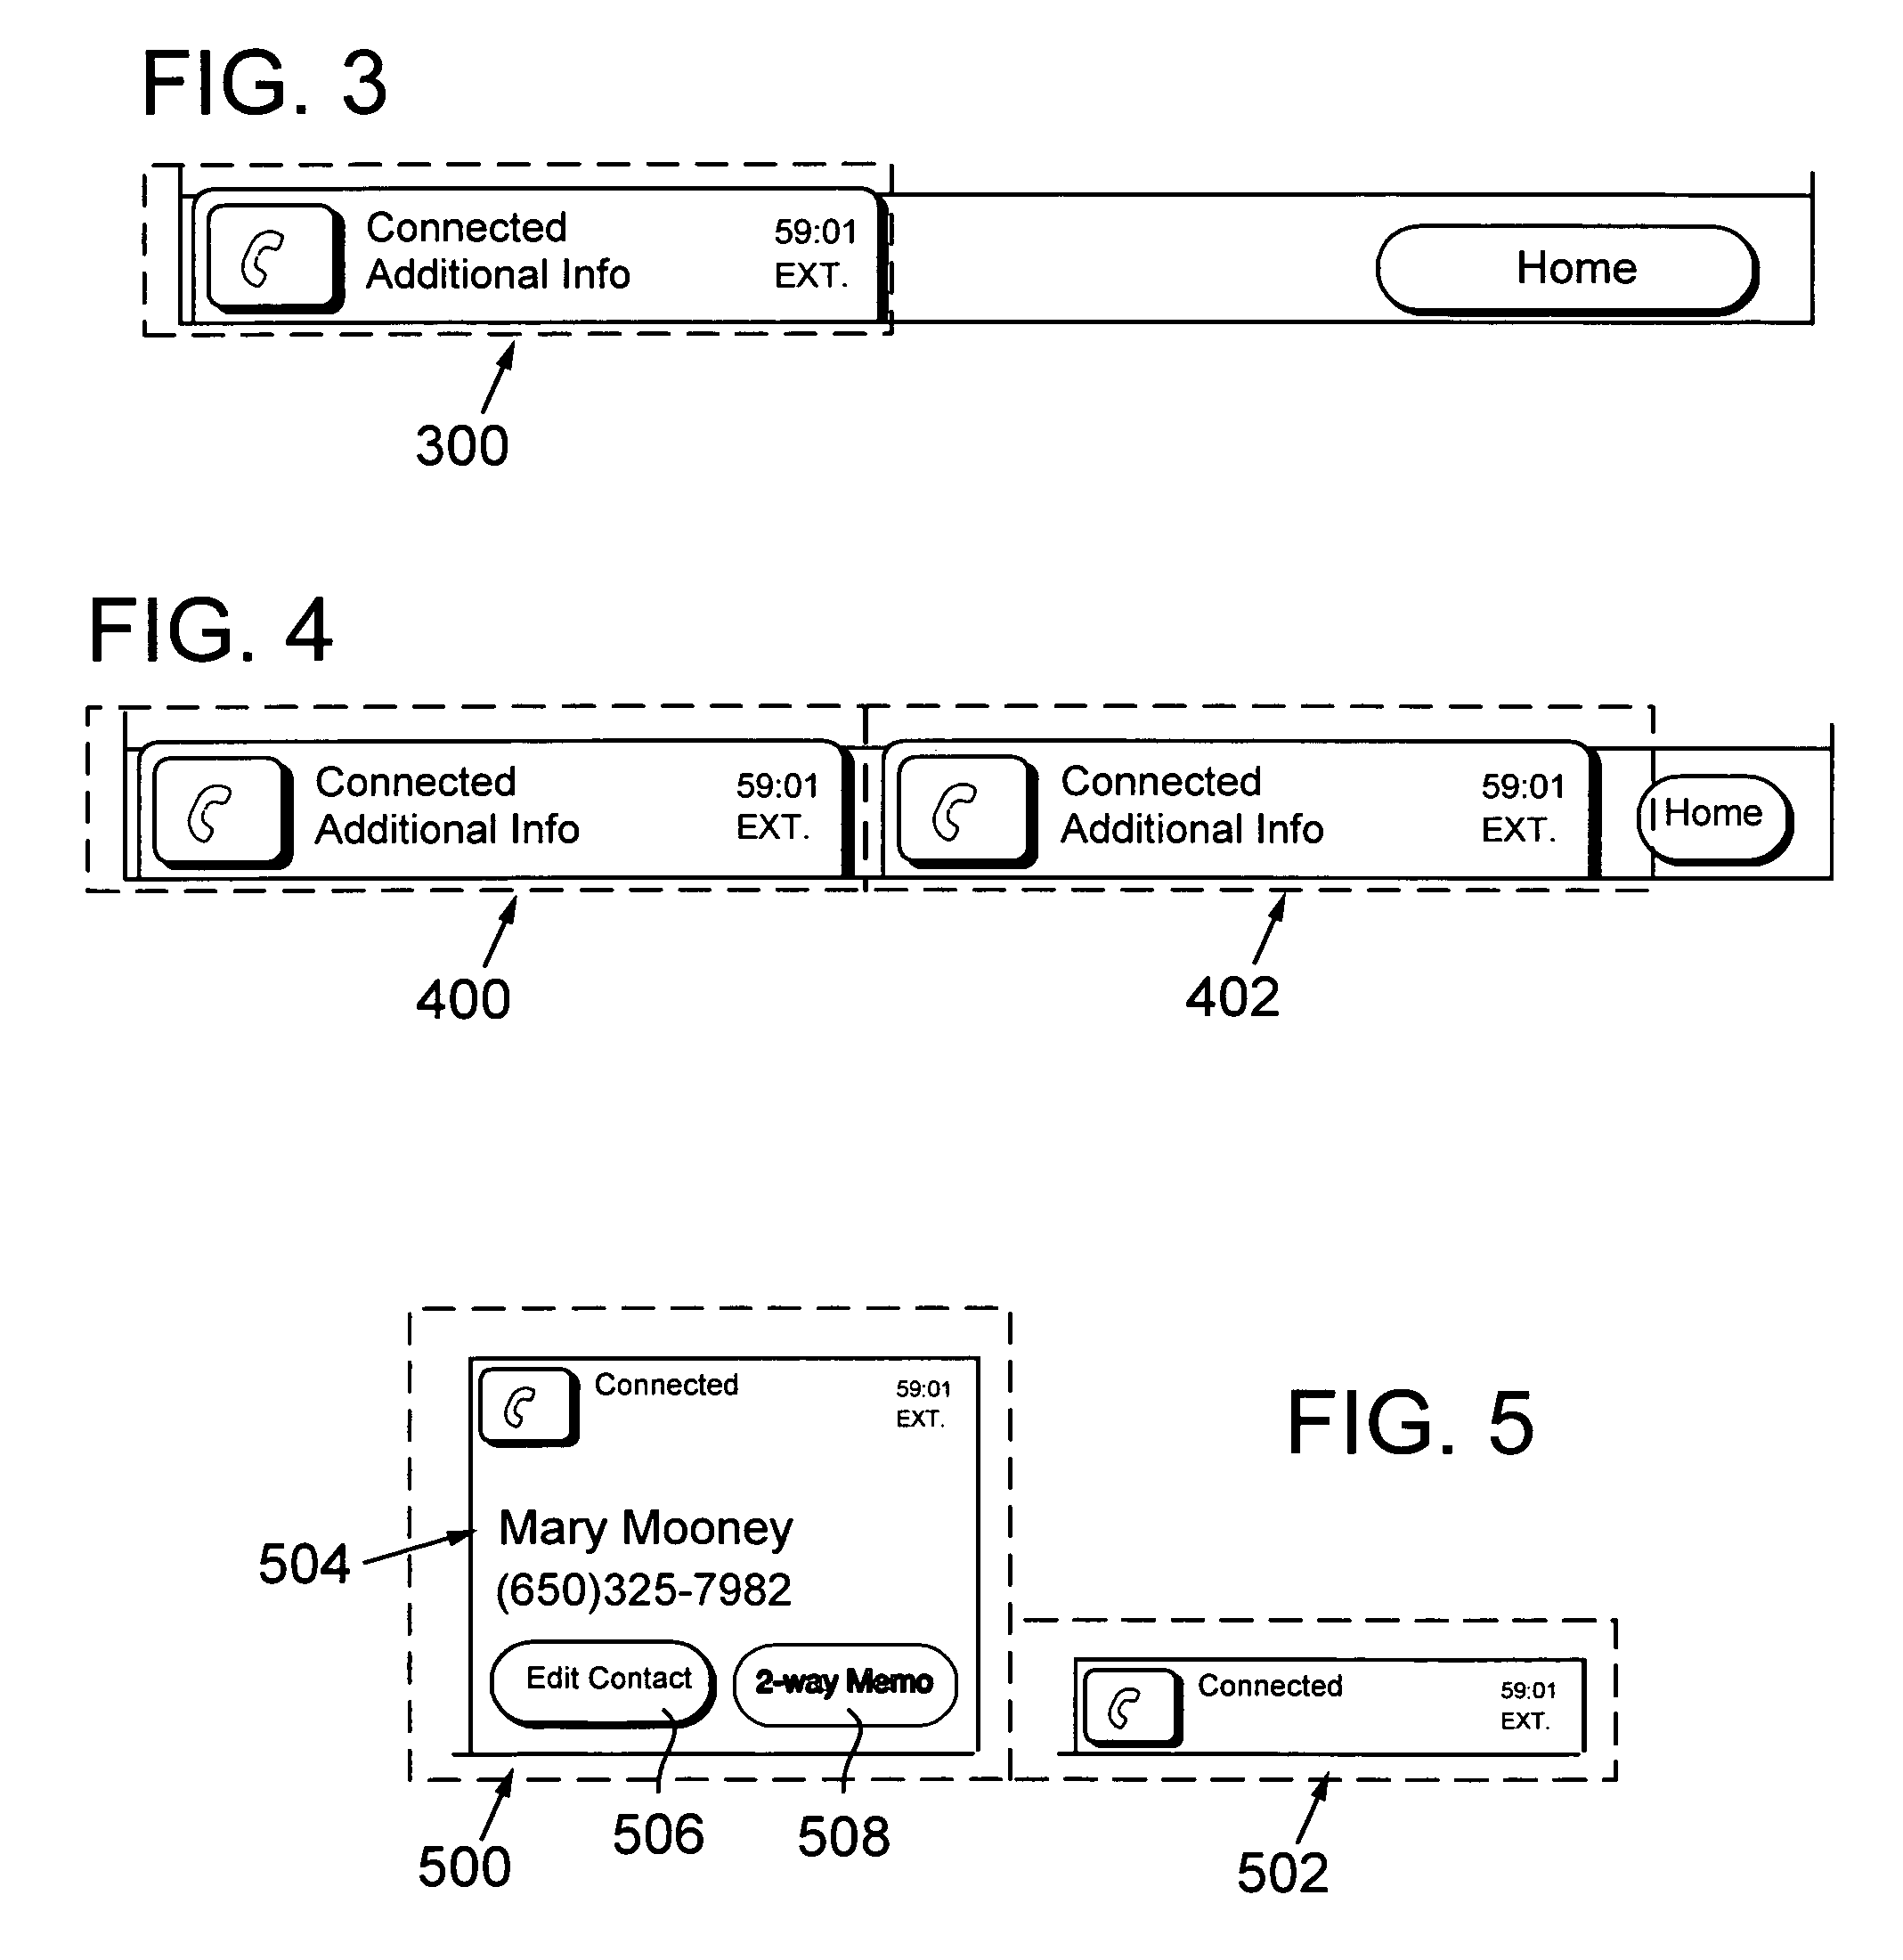 Common visual and functional architecture for presenting and controlling arbitrary telephone line features